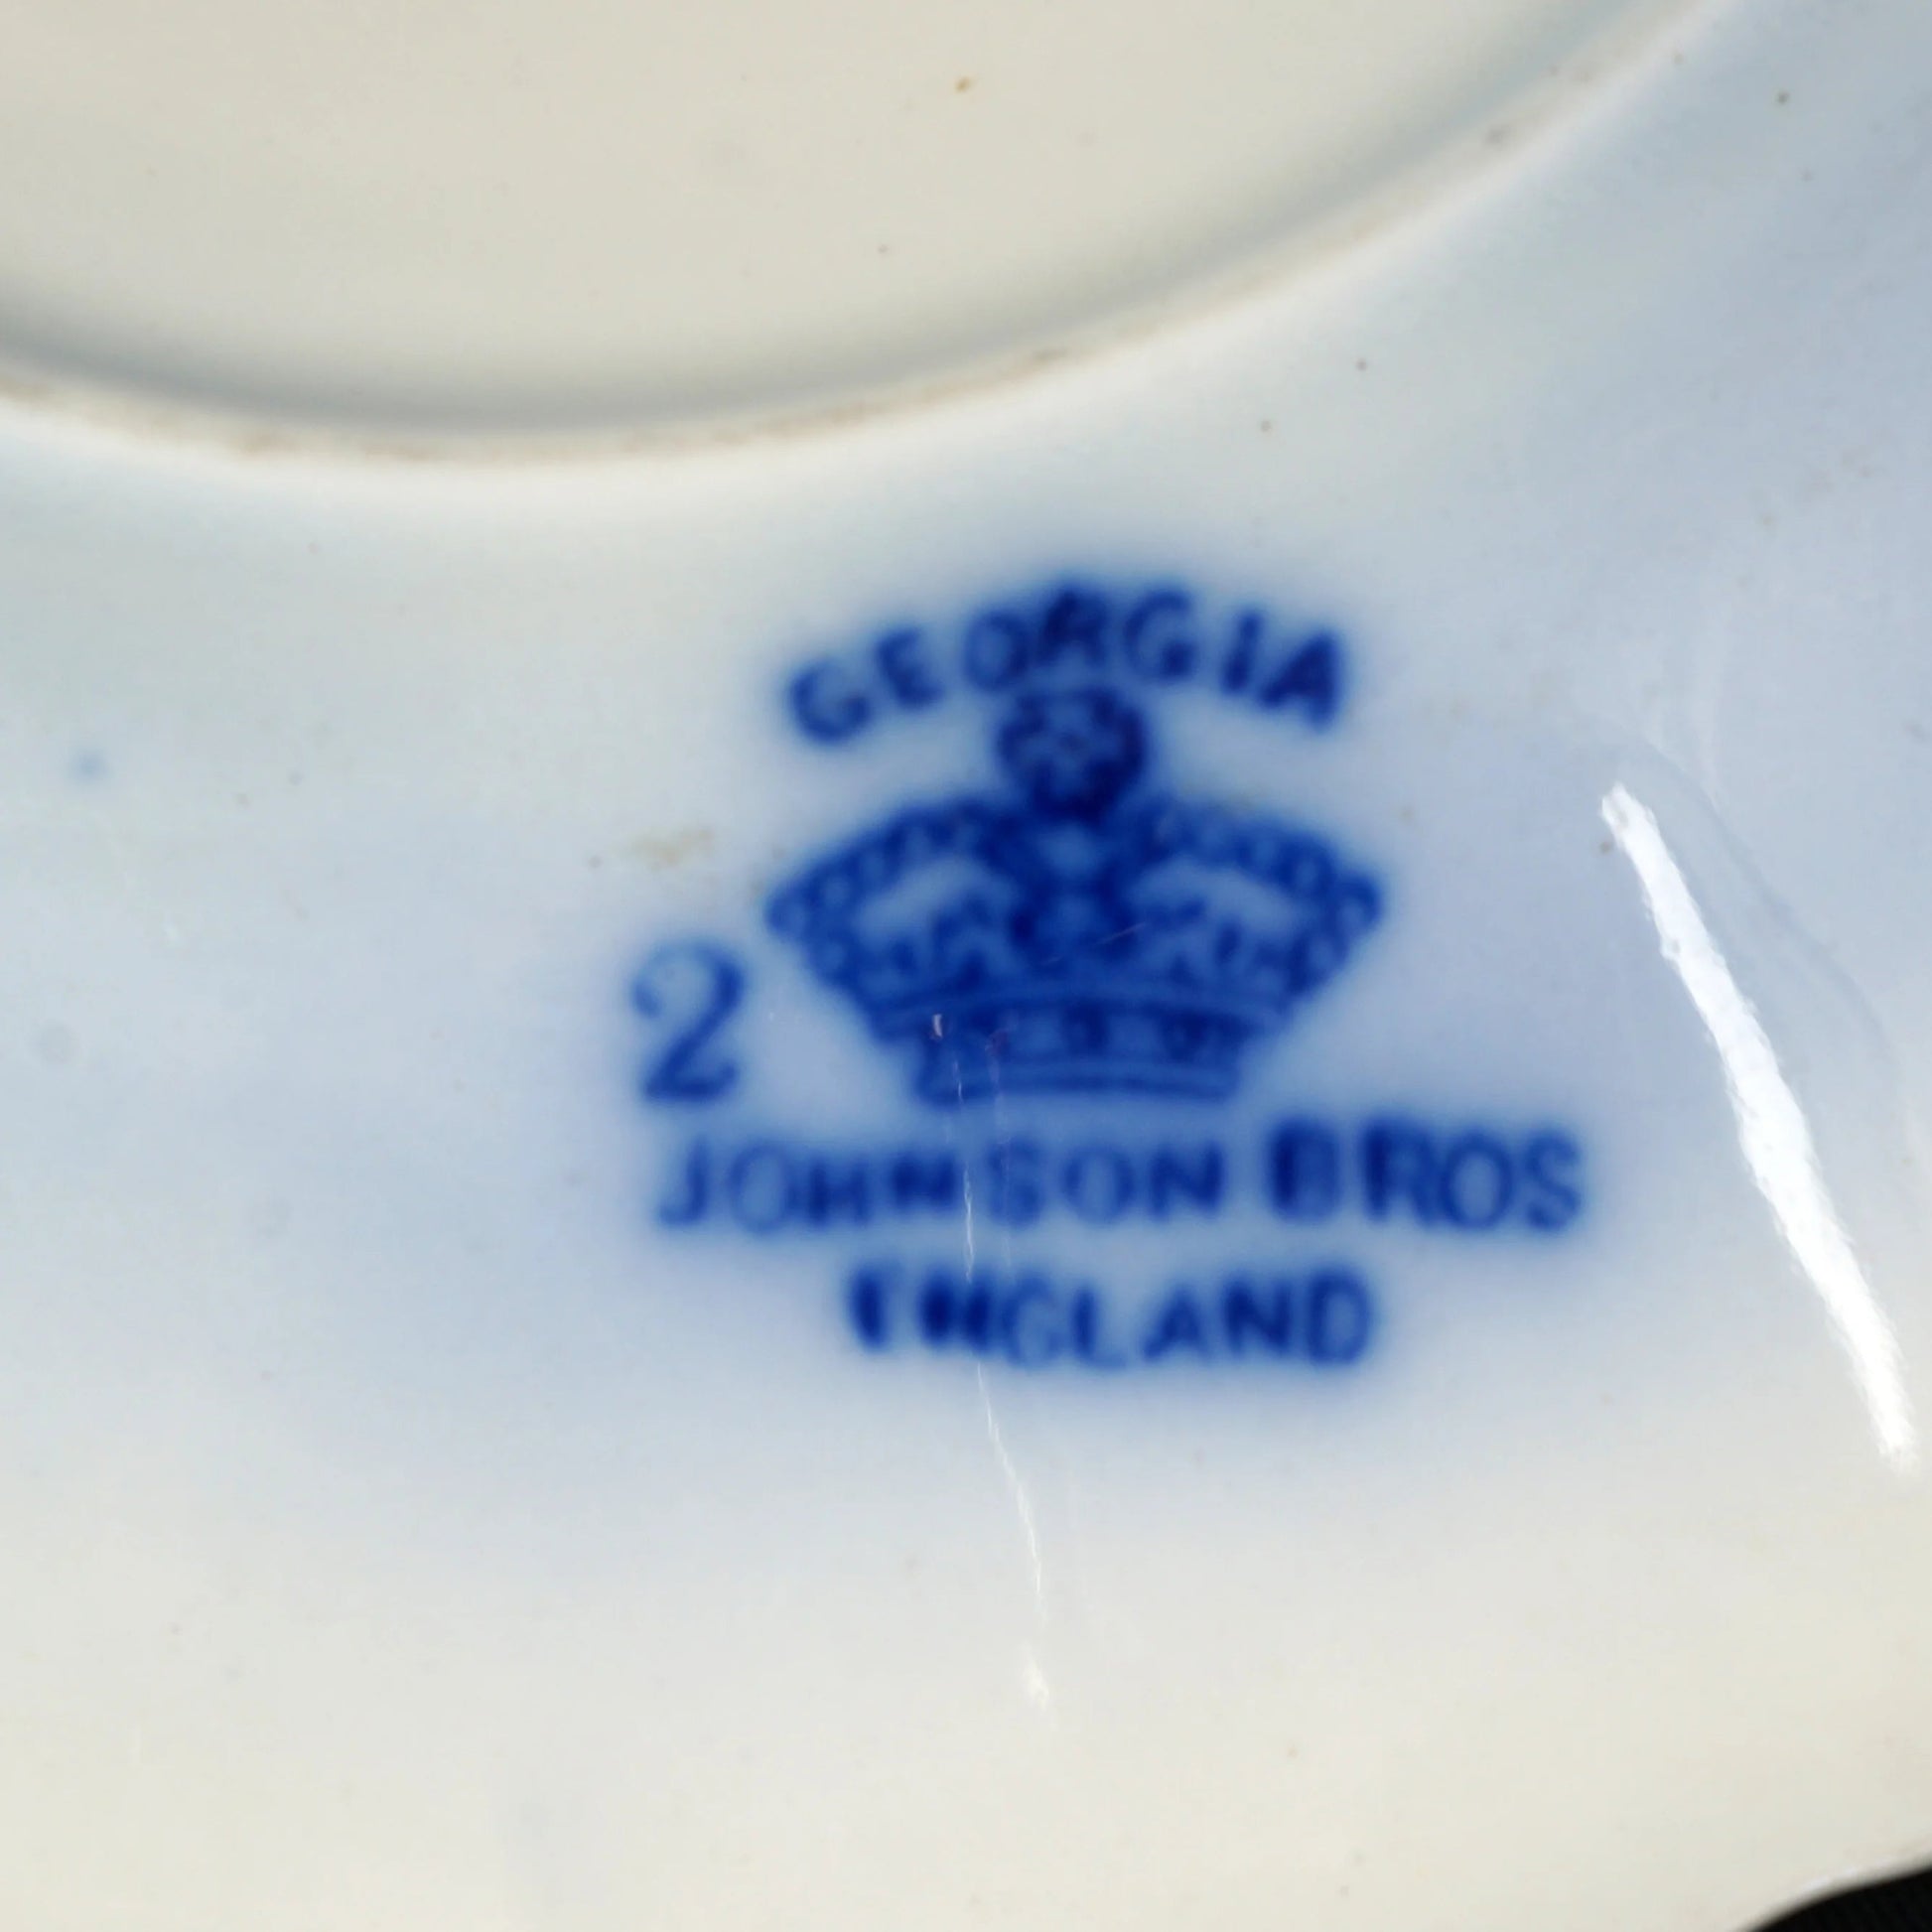 Antique English Flow Blue Teacup and Saucer Johnson Bros Georgia - Bear and Raven Antiques